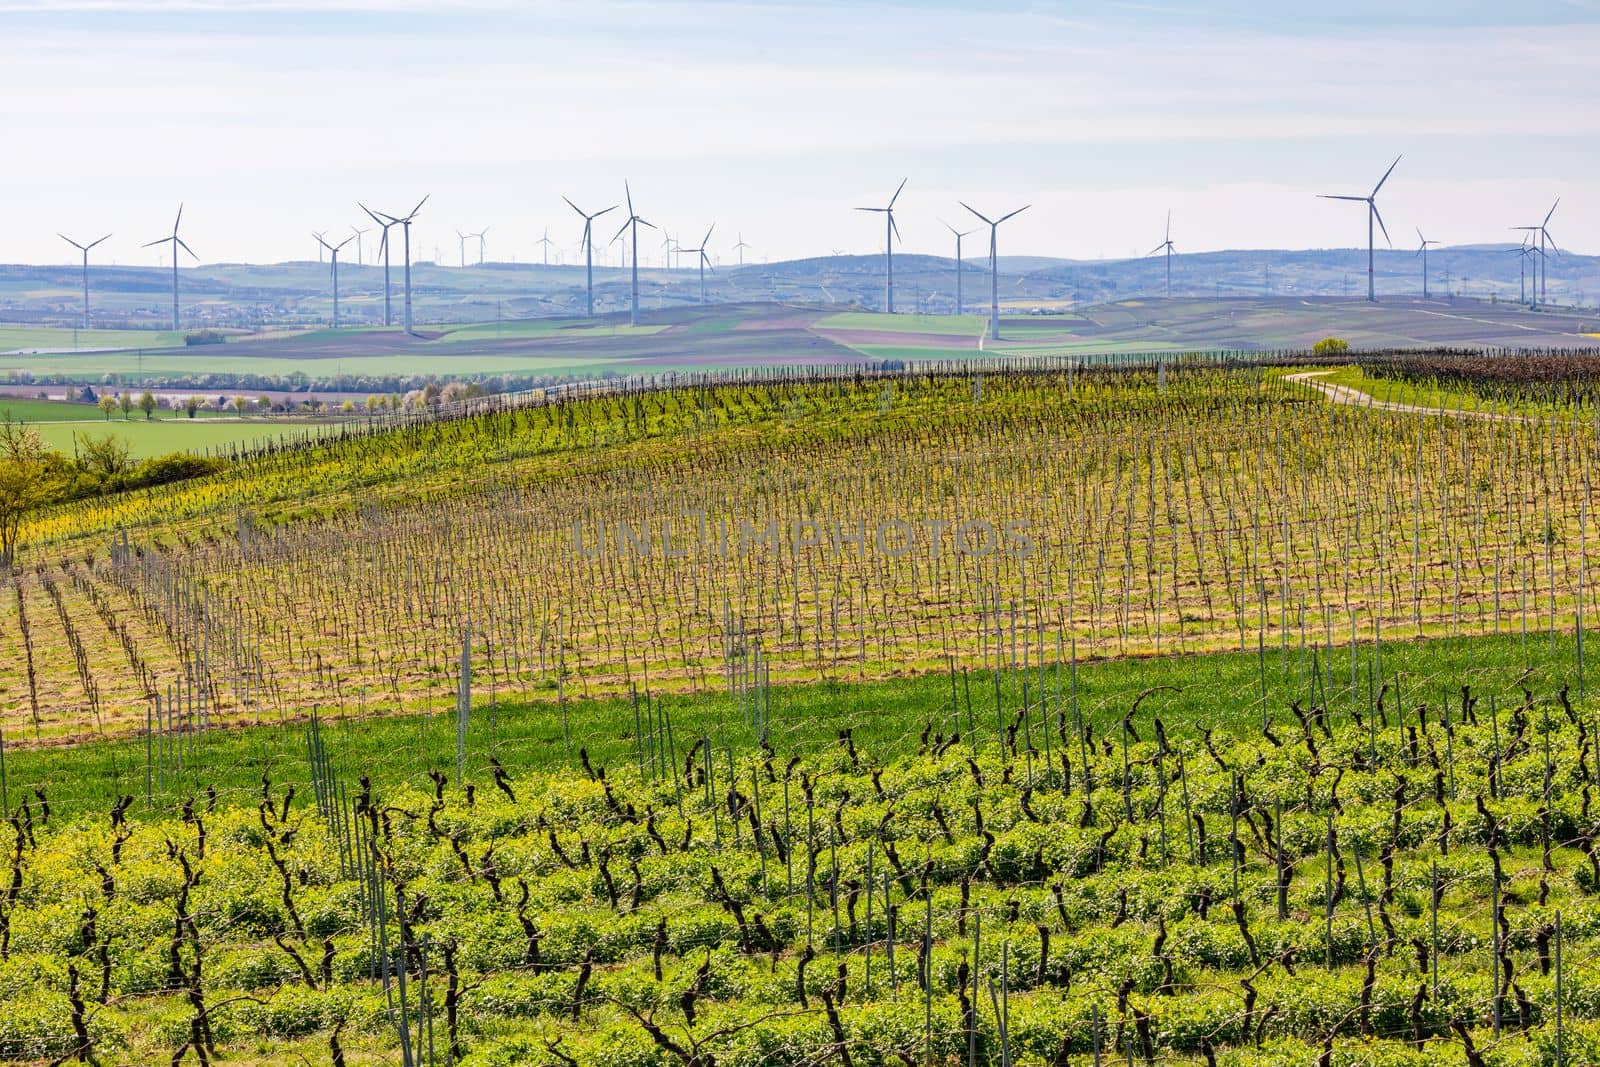 Countless wind turbines of an onshore wind farm next to fields and vineyards in Rhineland-Palatinate